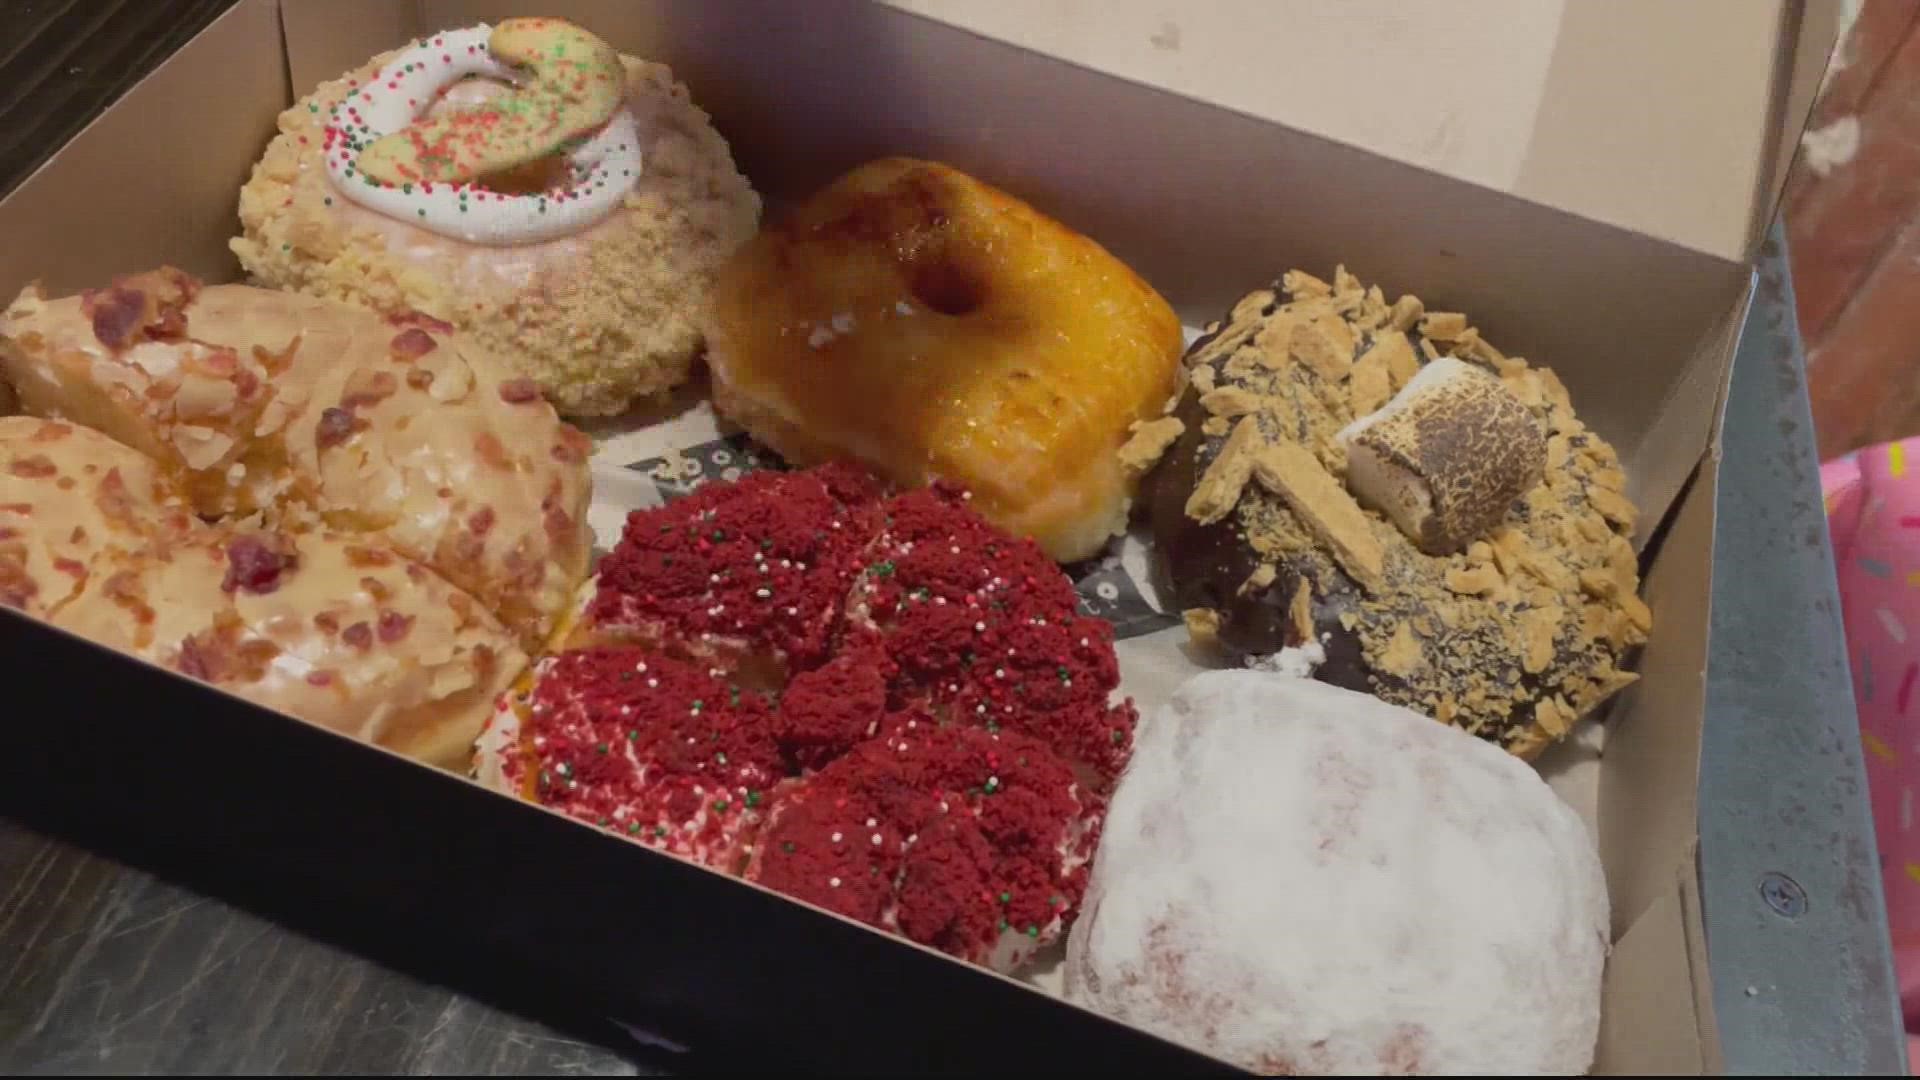 We are looking at a new way to find the best Donuts that DC has to offer. A new business is doing it and is aptly named the "Underground Donut Tour."